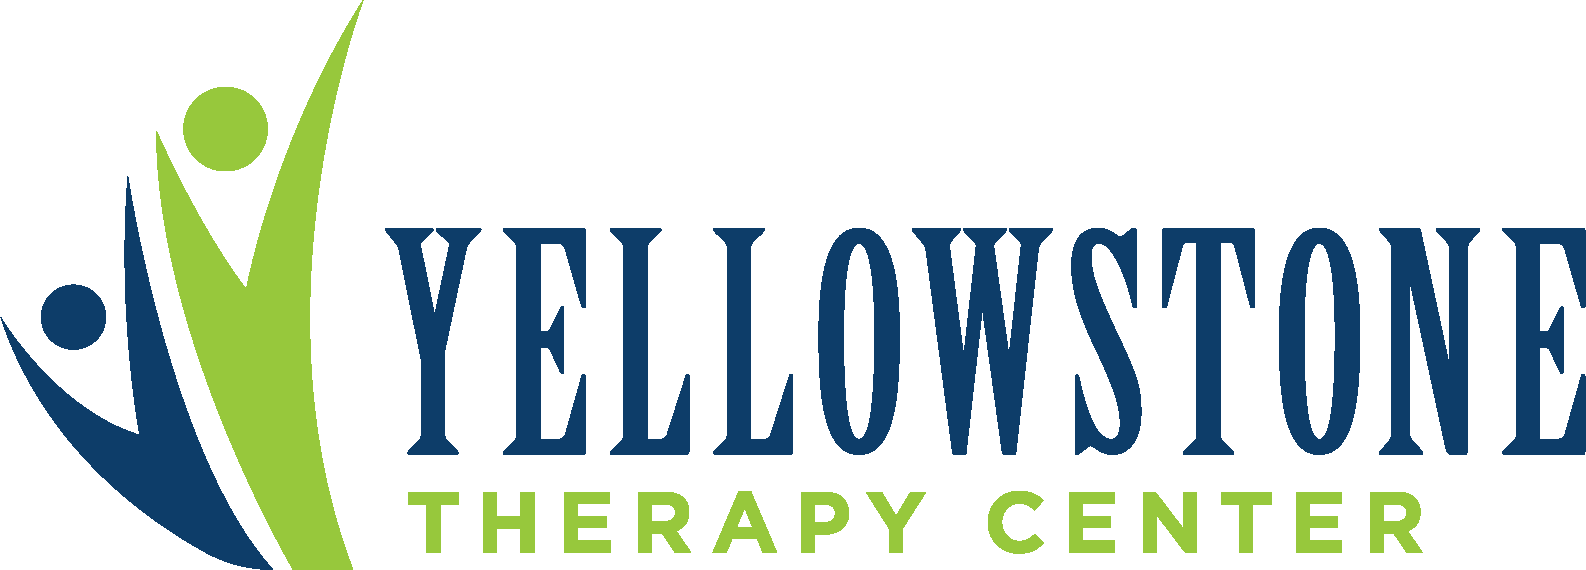 Yelllowstone Therapy Center